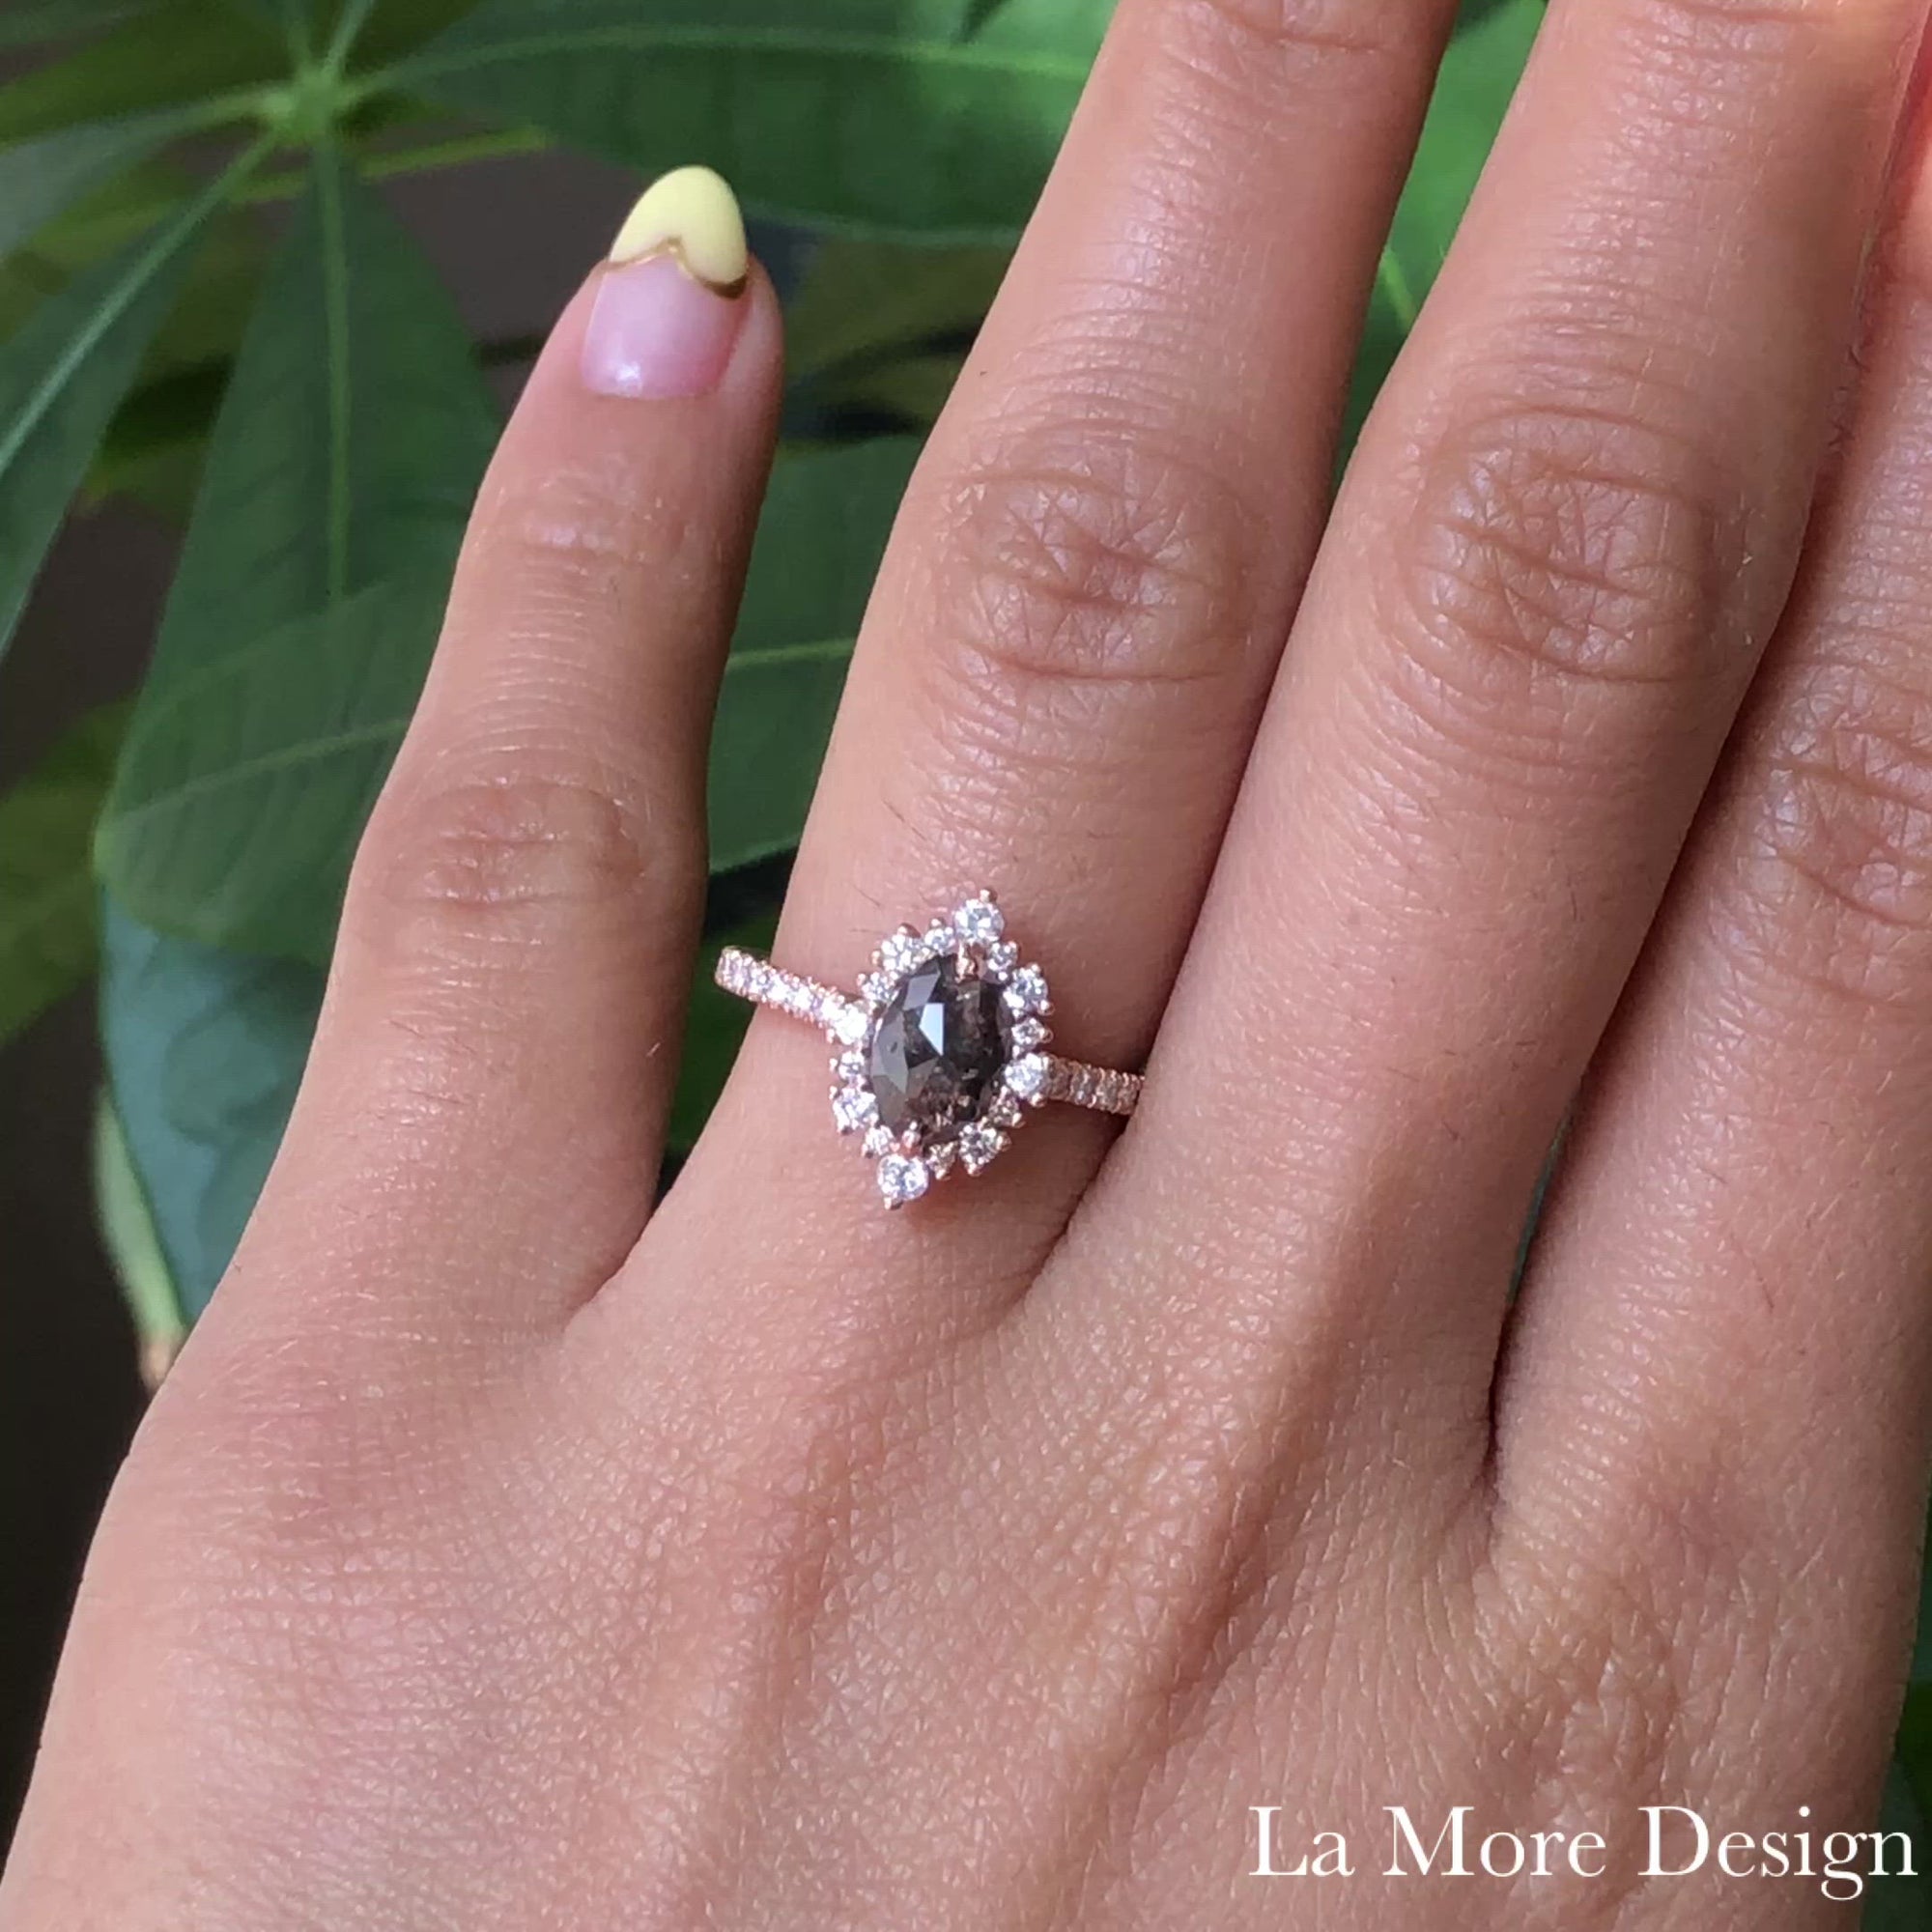 Breathtakingly stunning salt and pepper diamond engagement ring is crafted in the 14k rose gold tiara halo diamond ring setting with a 0.95-carat marquise-shaped rose cut natural grey diamond center ~ the total diamond weight of the whole ring is 1.43 ct.tw.  